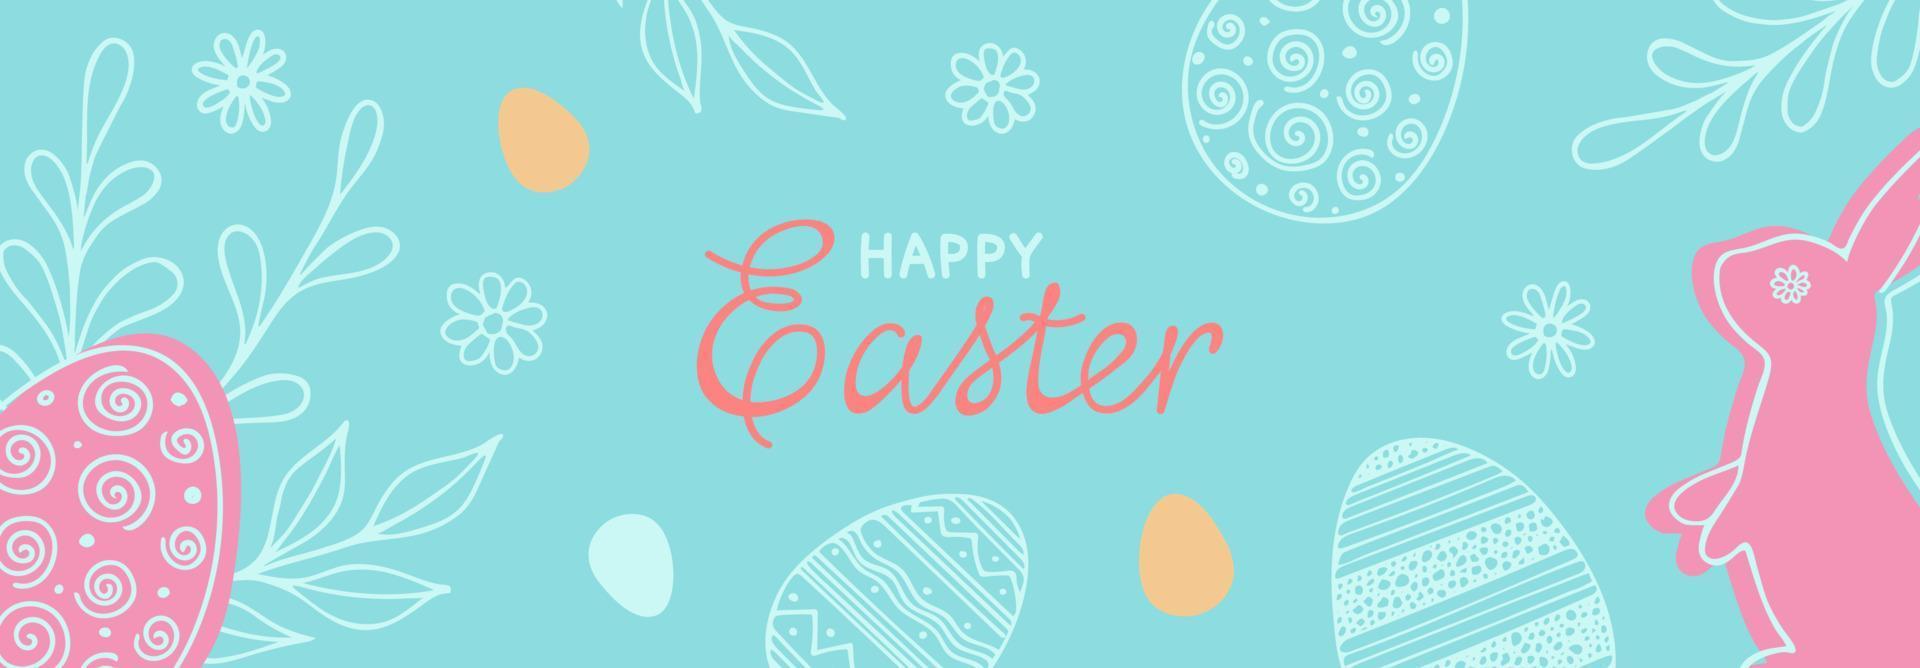 Happy Easter banner. Hand drawn vector illustration with rabbit, eggs, twigs, flowers and lettering for paty Easter design in pastel colors.